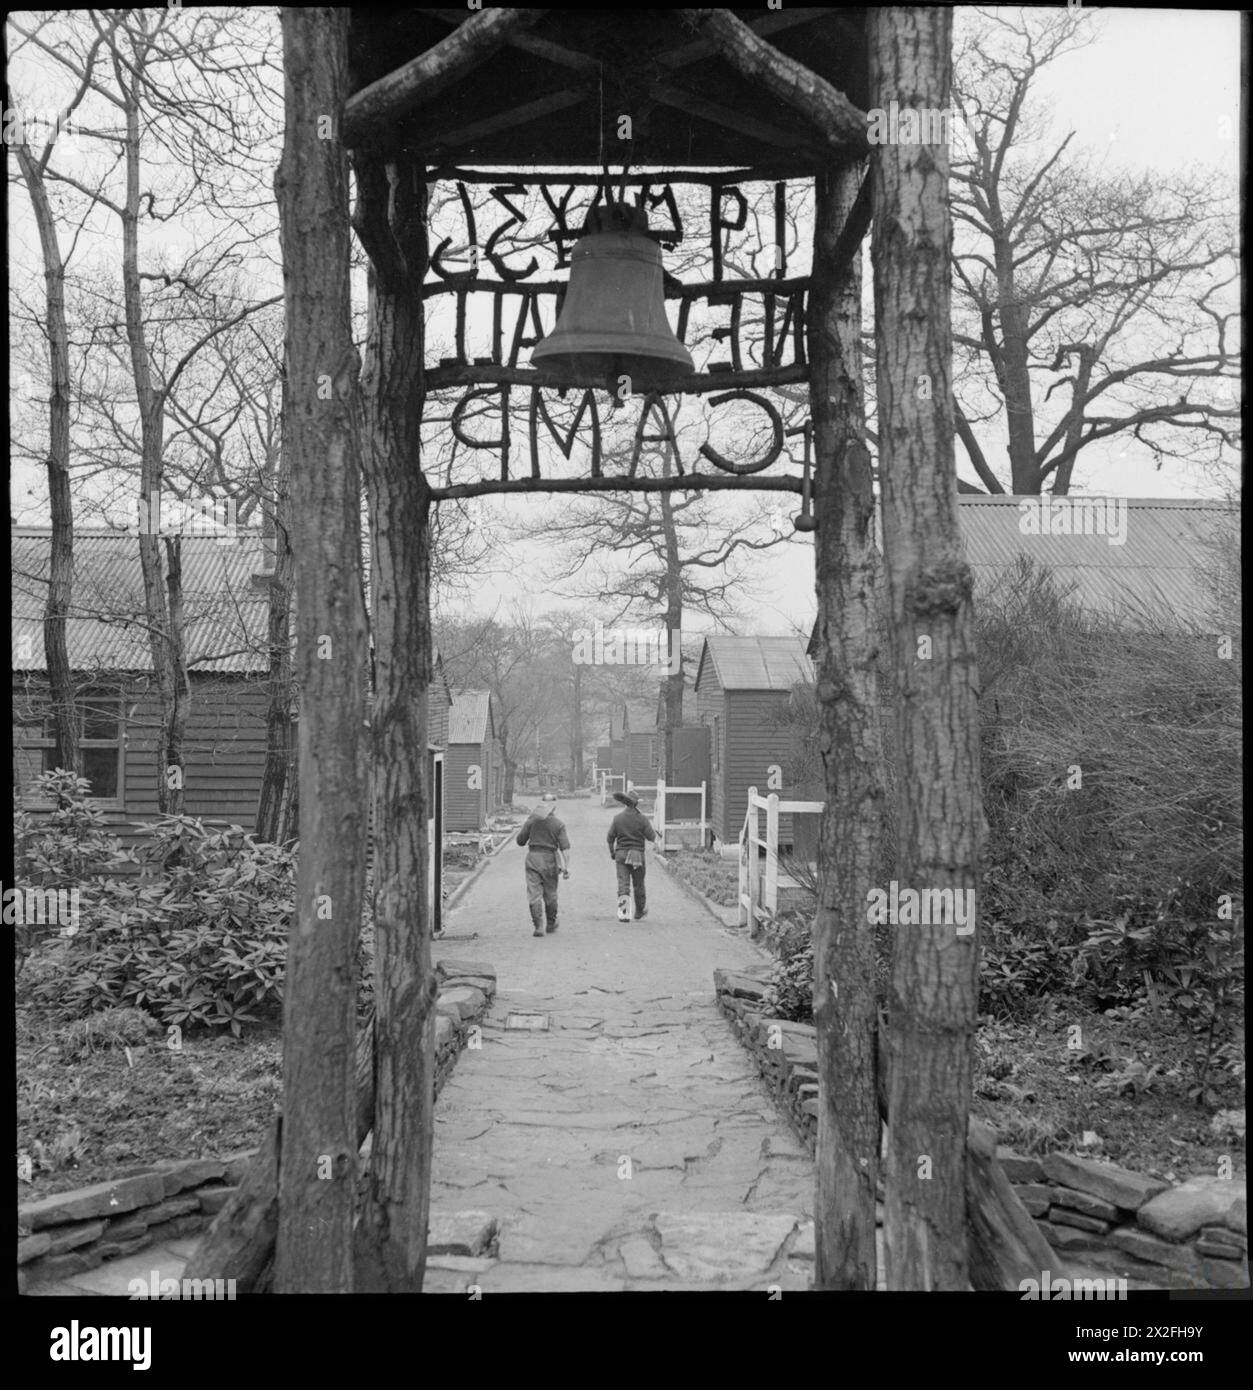 WAKEFIELD TRAINING PRISON AND CAMP: EVERYDAY LIFE IN A BRITISH PRISON, WAKEFIELD, YORKSHIRE, ENGLAND, 1944 - The entrance to New Hall Camp at Wakefield Training Prison. Two inmates walk down the path towards their huts, carrying garden tools. According to the original caption, the land for this camp was acquired in 1933. 'Parties of prisoners conveyed daily from Wakefield Prison cleared the woodland for cultivation and gradually erected the camp' Stock Photo